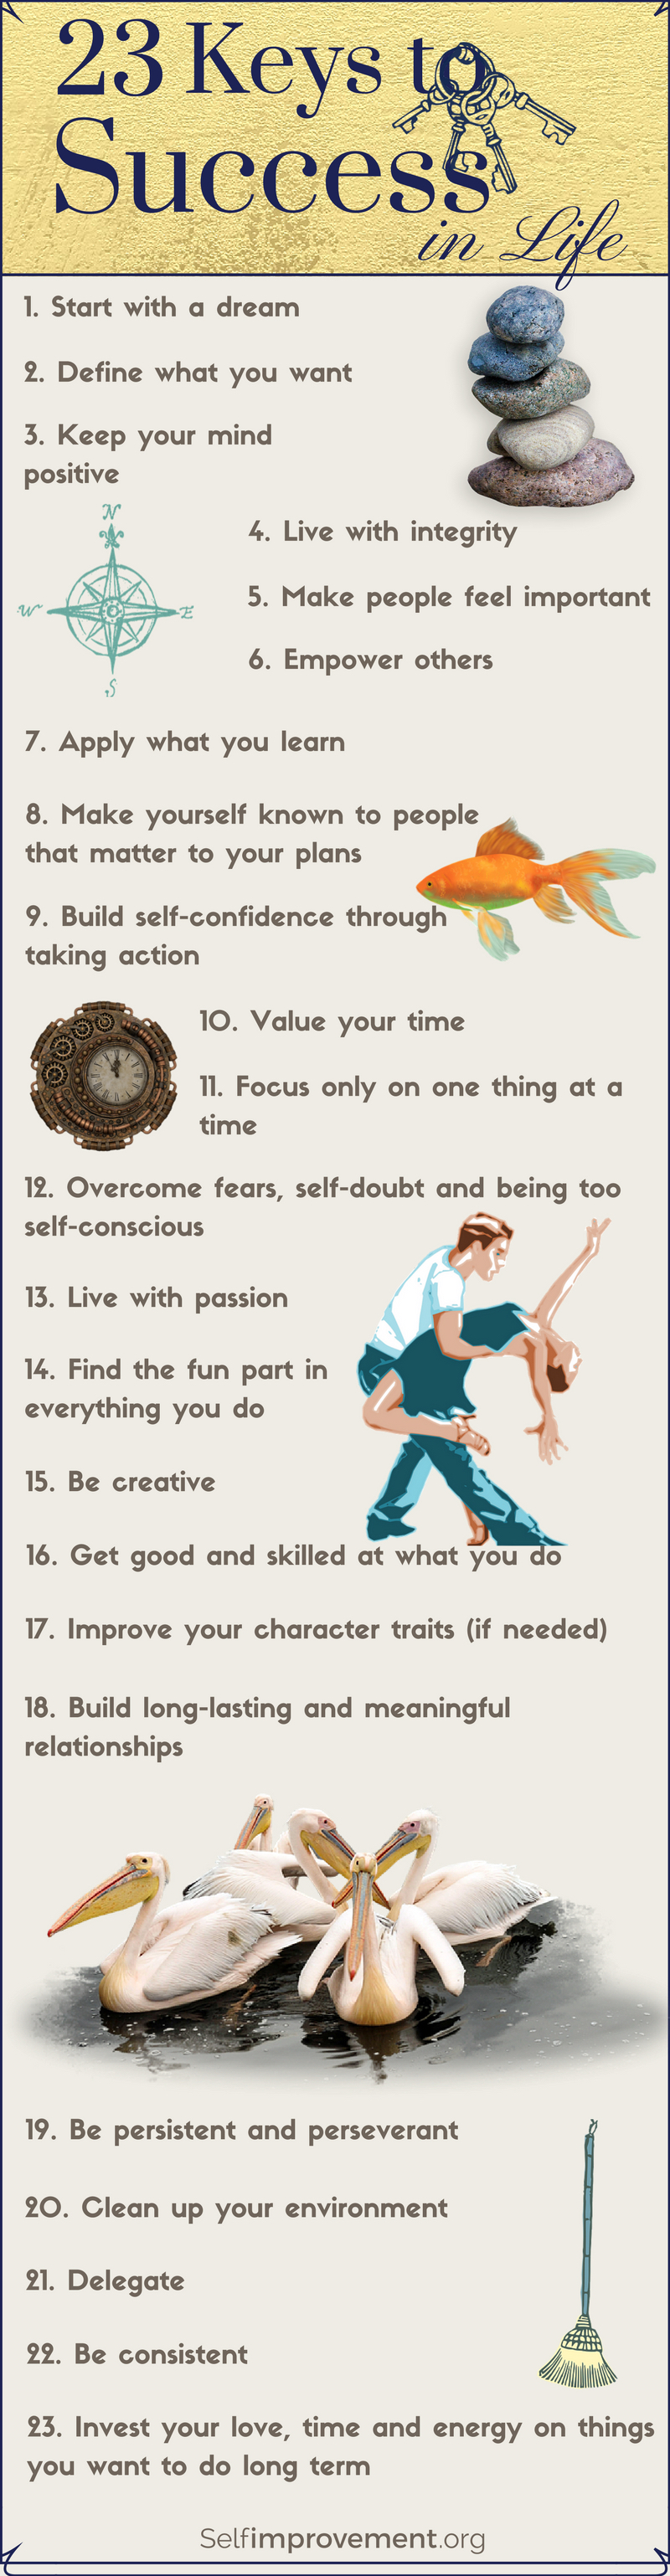 23 Keys to Success in Life by Carmen Jacob, selfimprovement.org | From the blog of Nicholas C. Rossis, author of science fiction, the Pearseus epic fantasy series and children's books